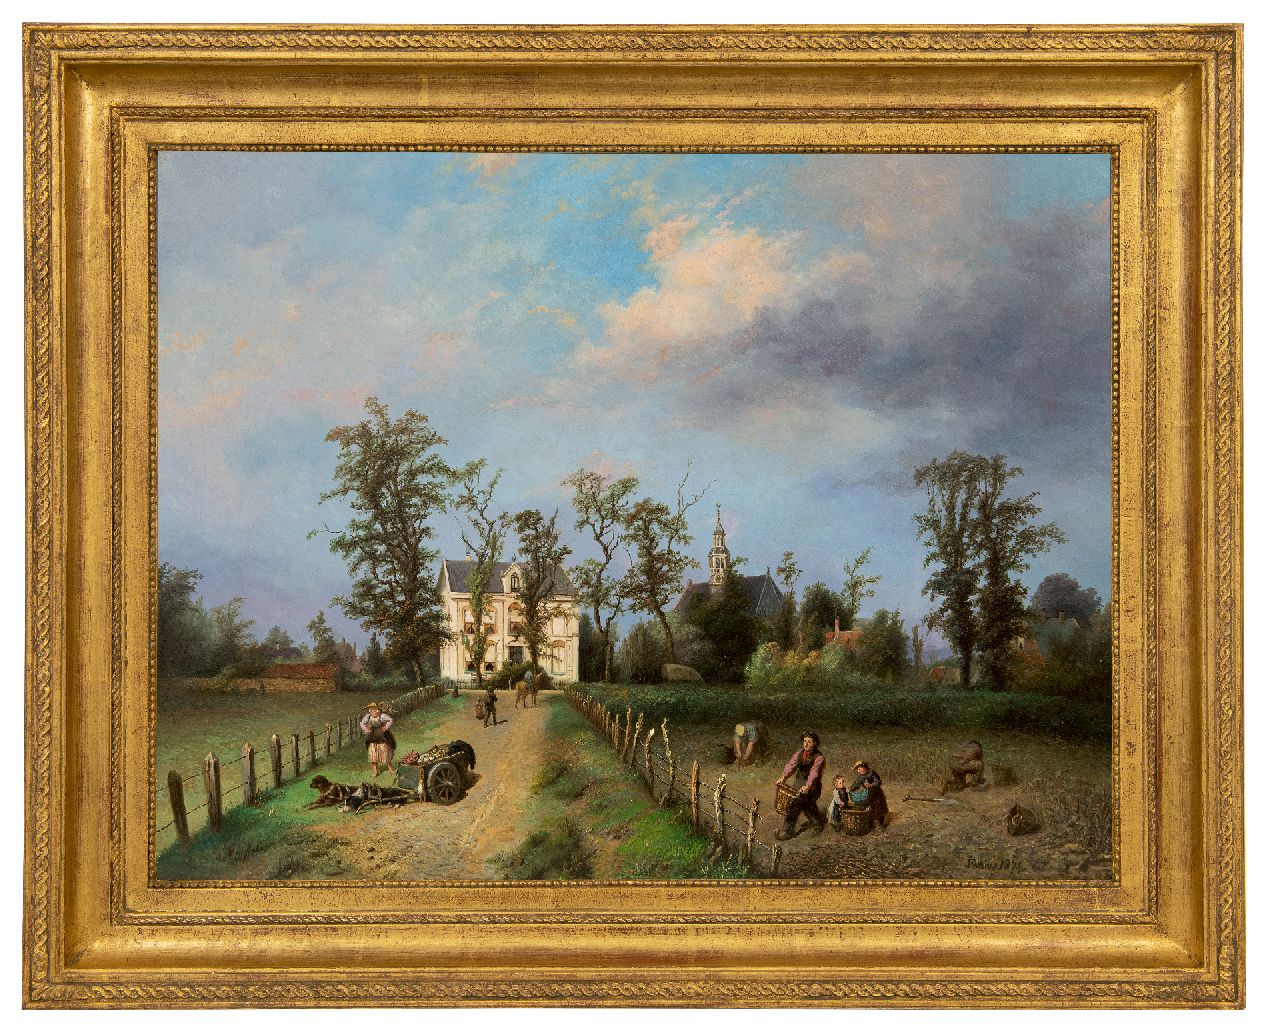 Fabius J.  | Jan Fabius, A view of the Achterweg in Heemsede with the new rectory and the Oude Kerk, oil on canvas laid down on board 49.4 x 64.4 cm, signed l.r. and dated 1875